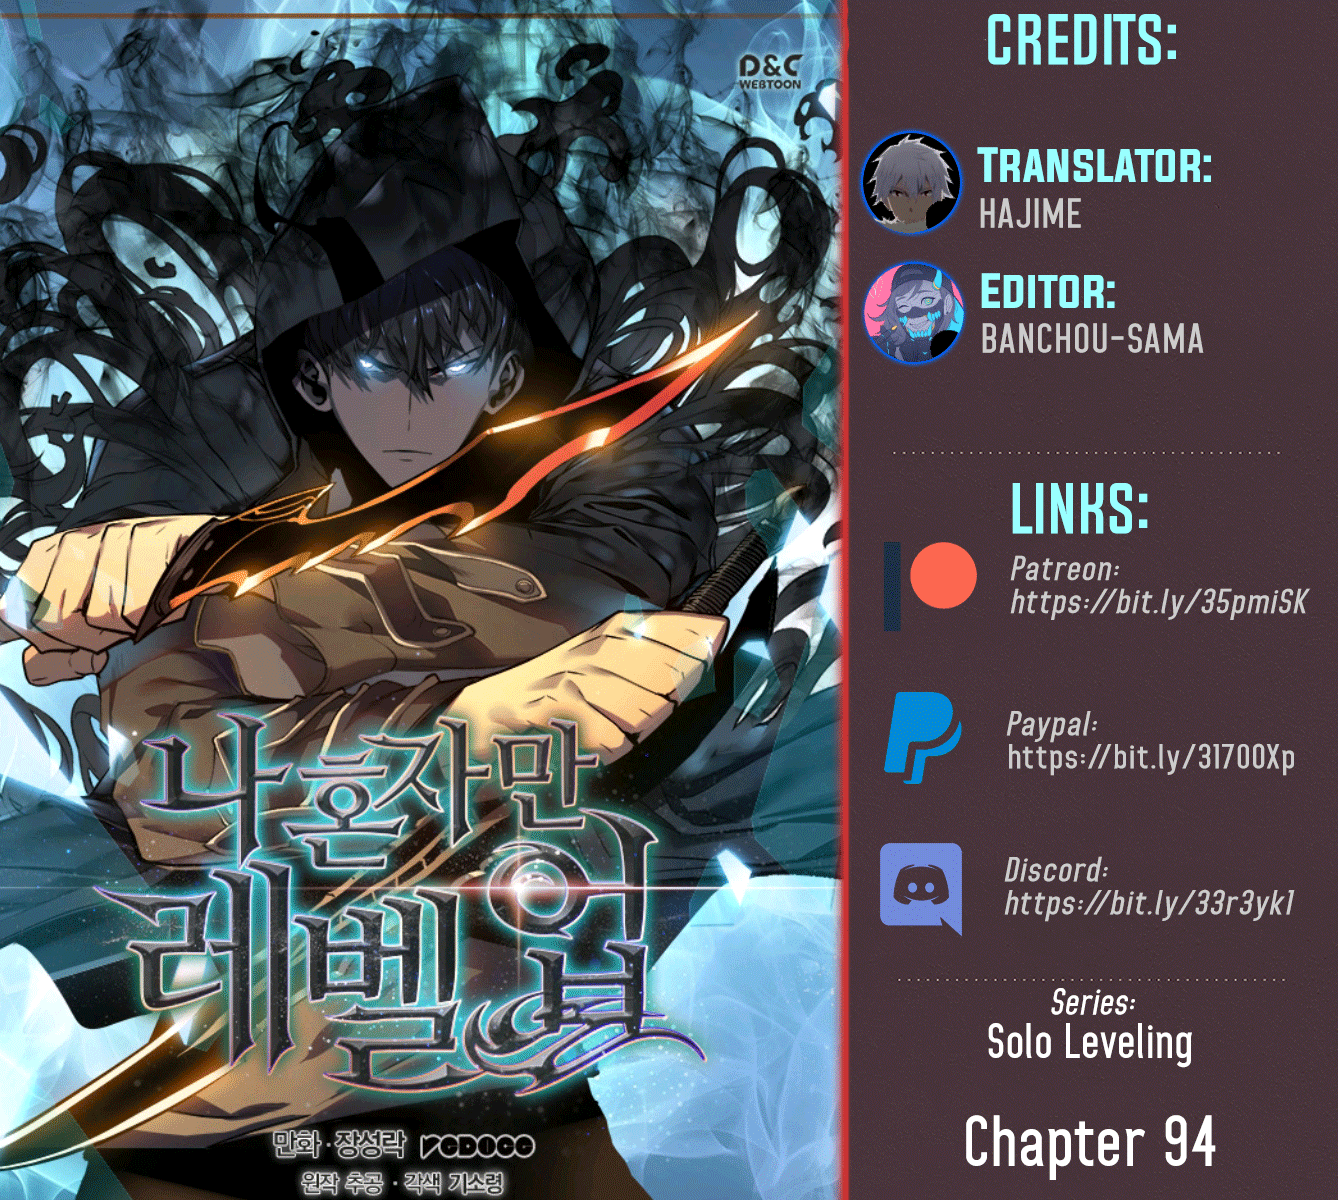 Solo Leveling chapter 94